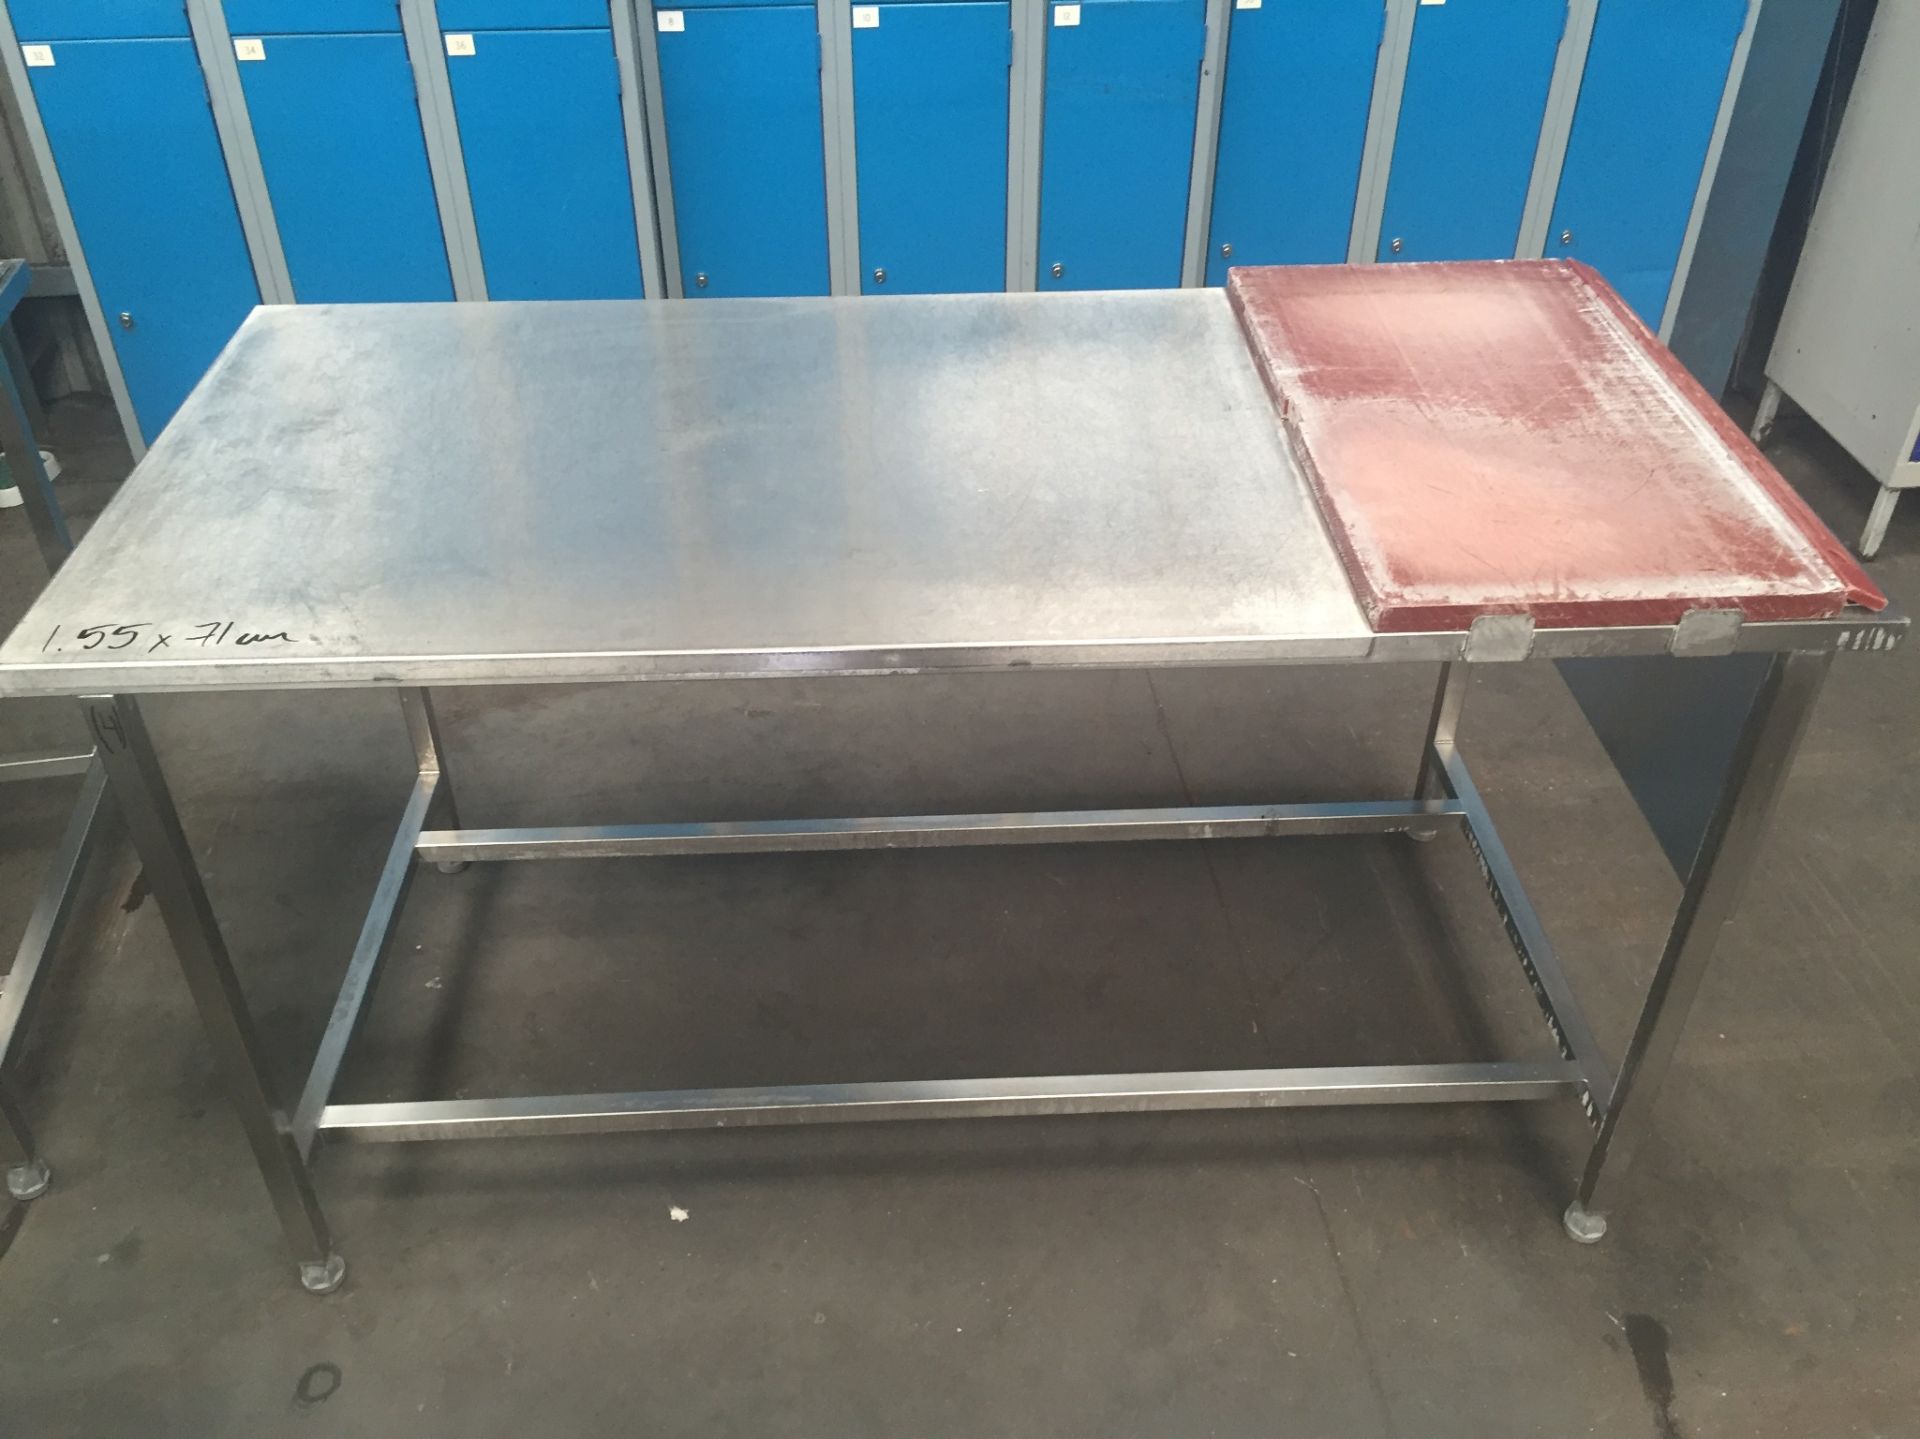 Stainless steel table with plastic chopping board measuring 380 x 700, with knife holder, overall